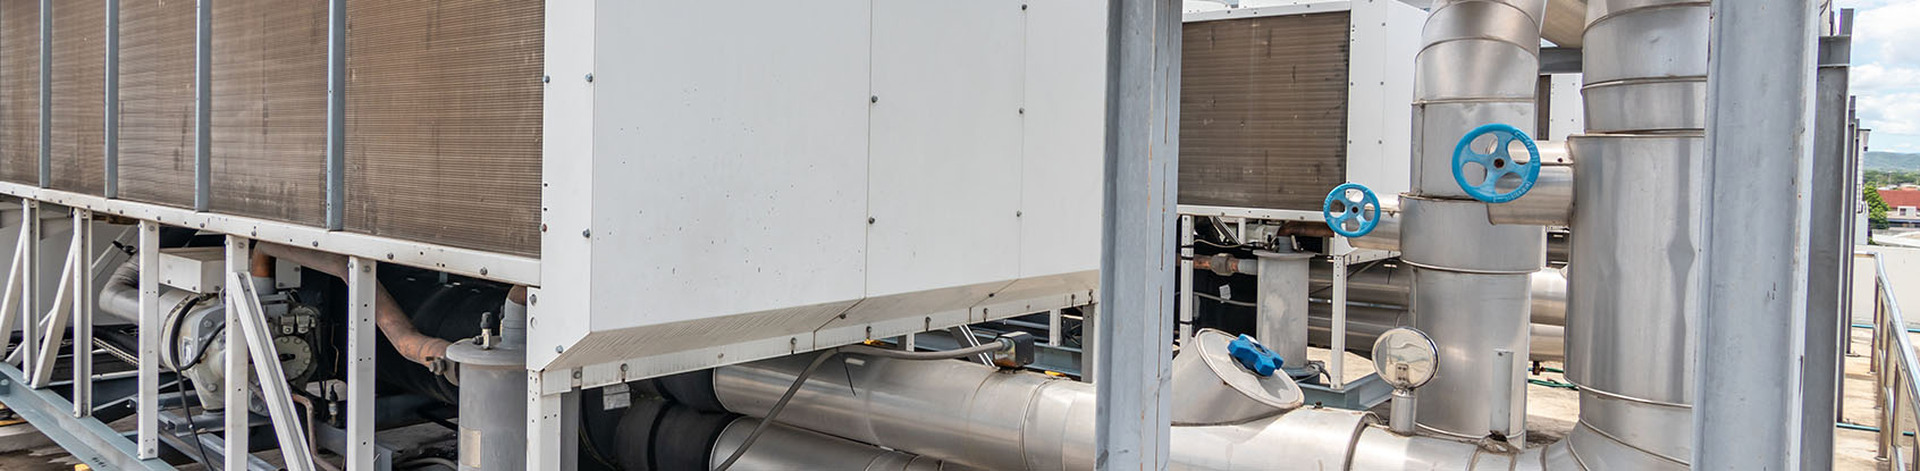 Commercial HVAC Frequently Asked Questions